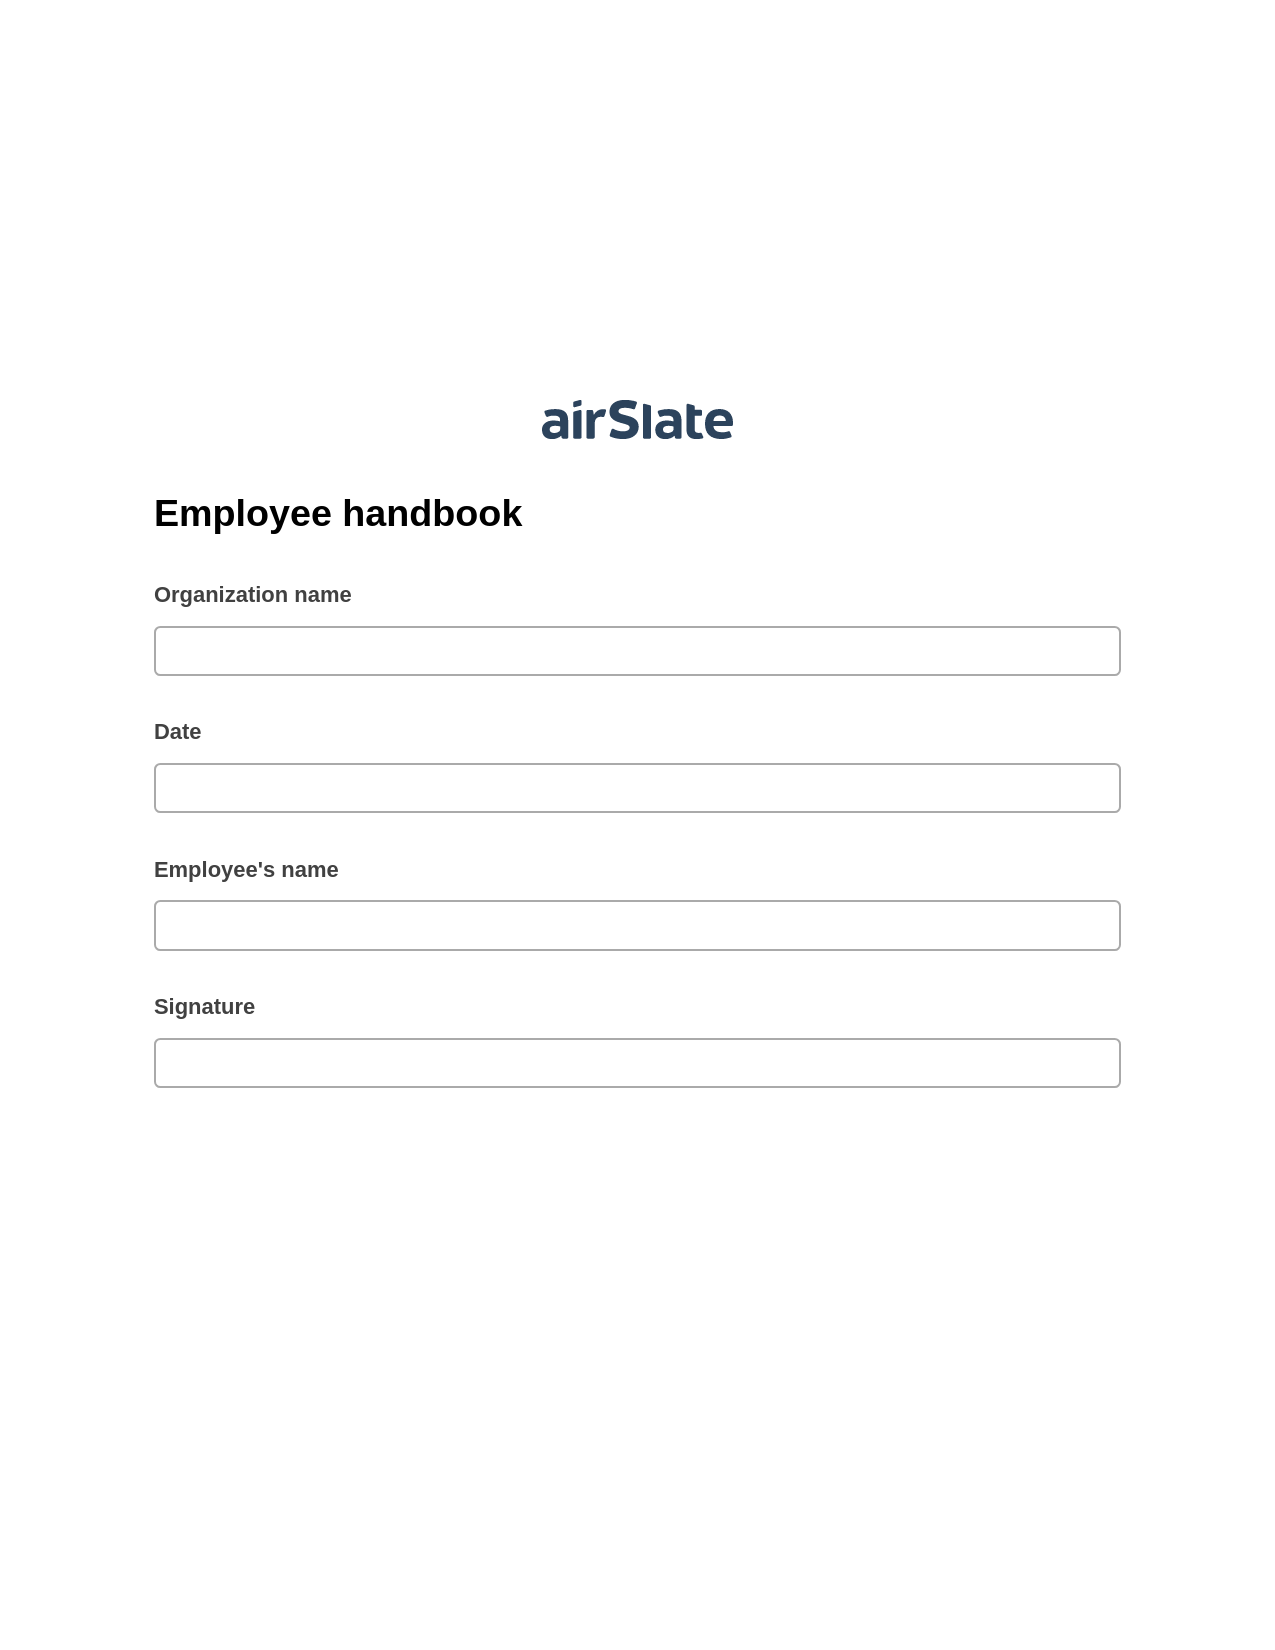 Multirole Employee handbook Pre-fill Slate from MS Dynamics 365 Records Bot, Pre-fill with Custom Data Bot, Archive to SharePoint Folder Bot